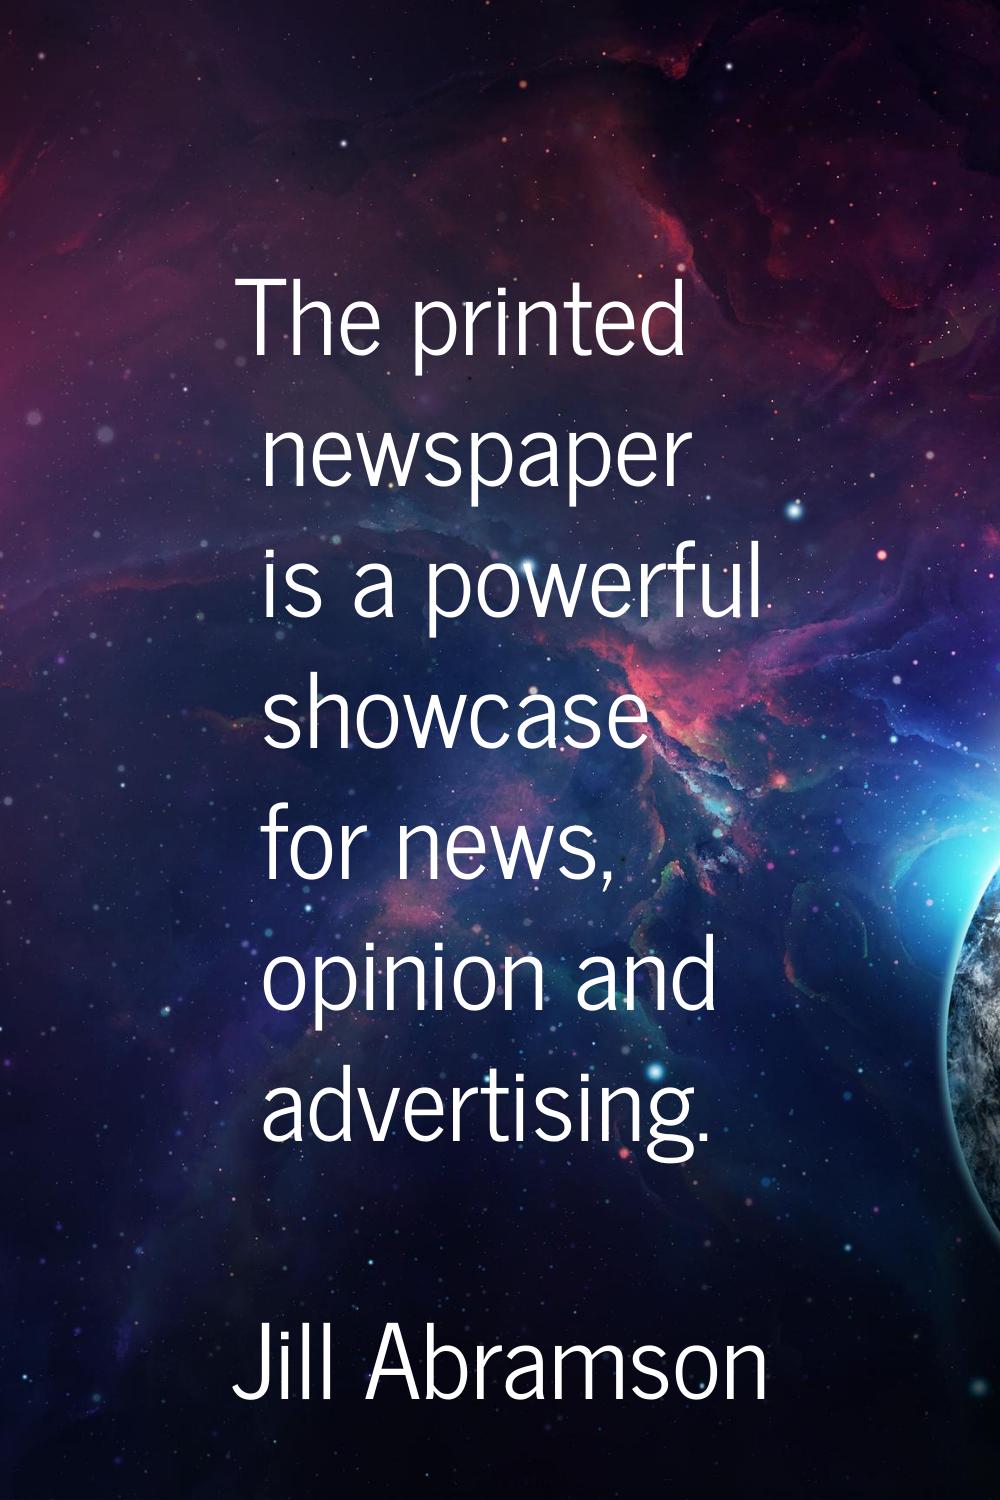 The printed newspaper is a powerful showcase for news, opinion and advertising.